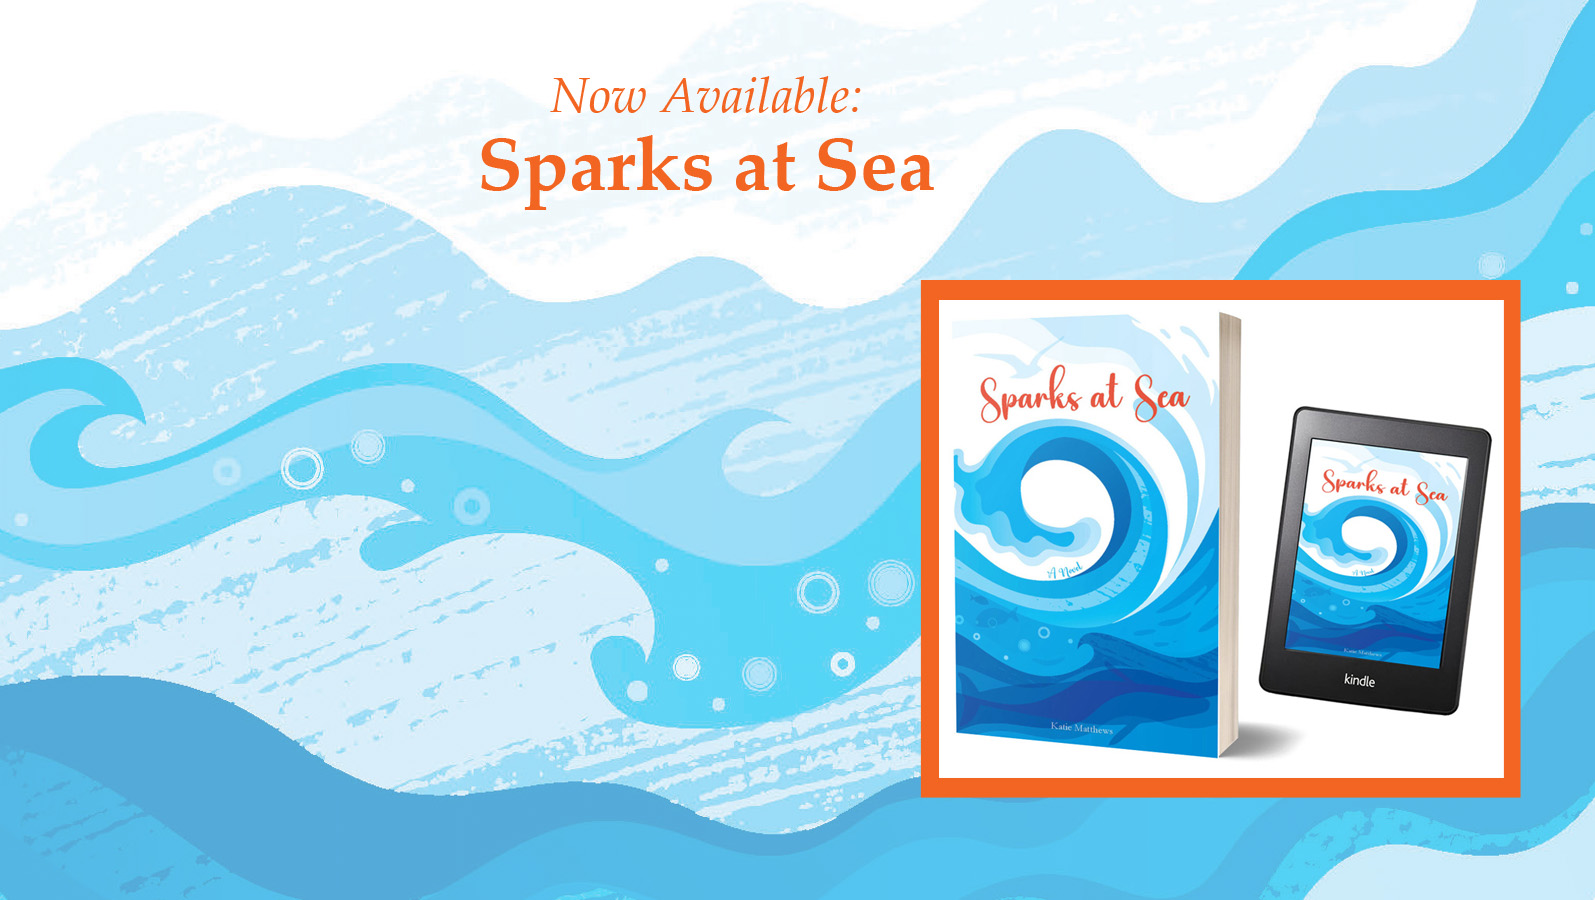 Sparks at Sea book available